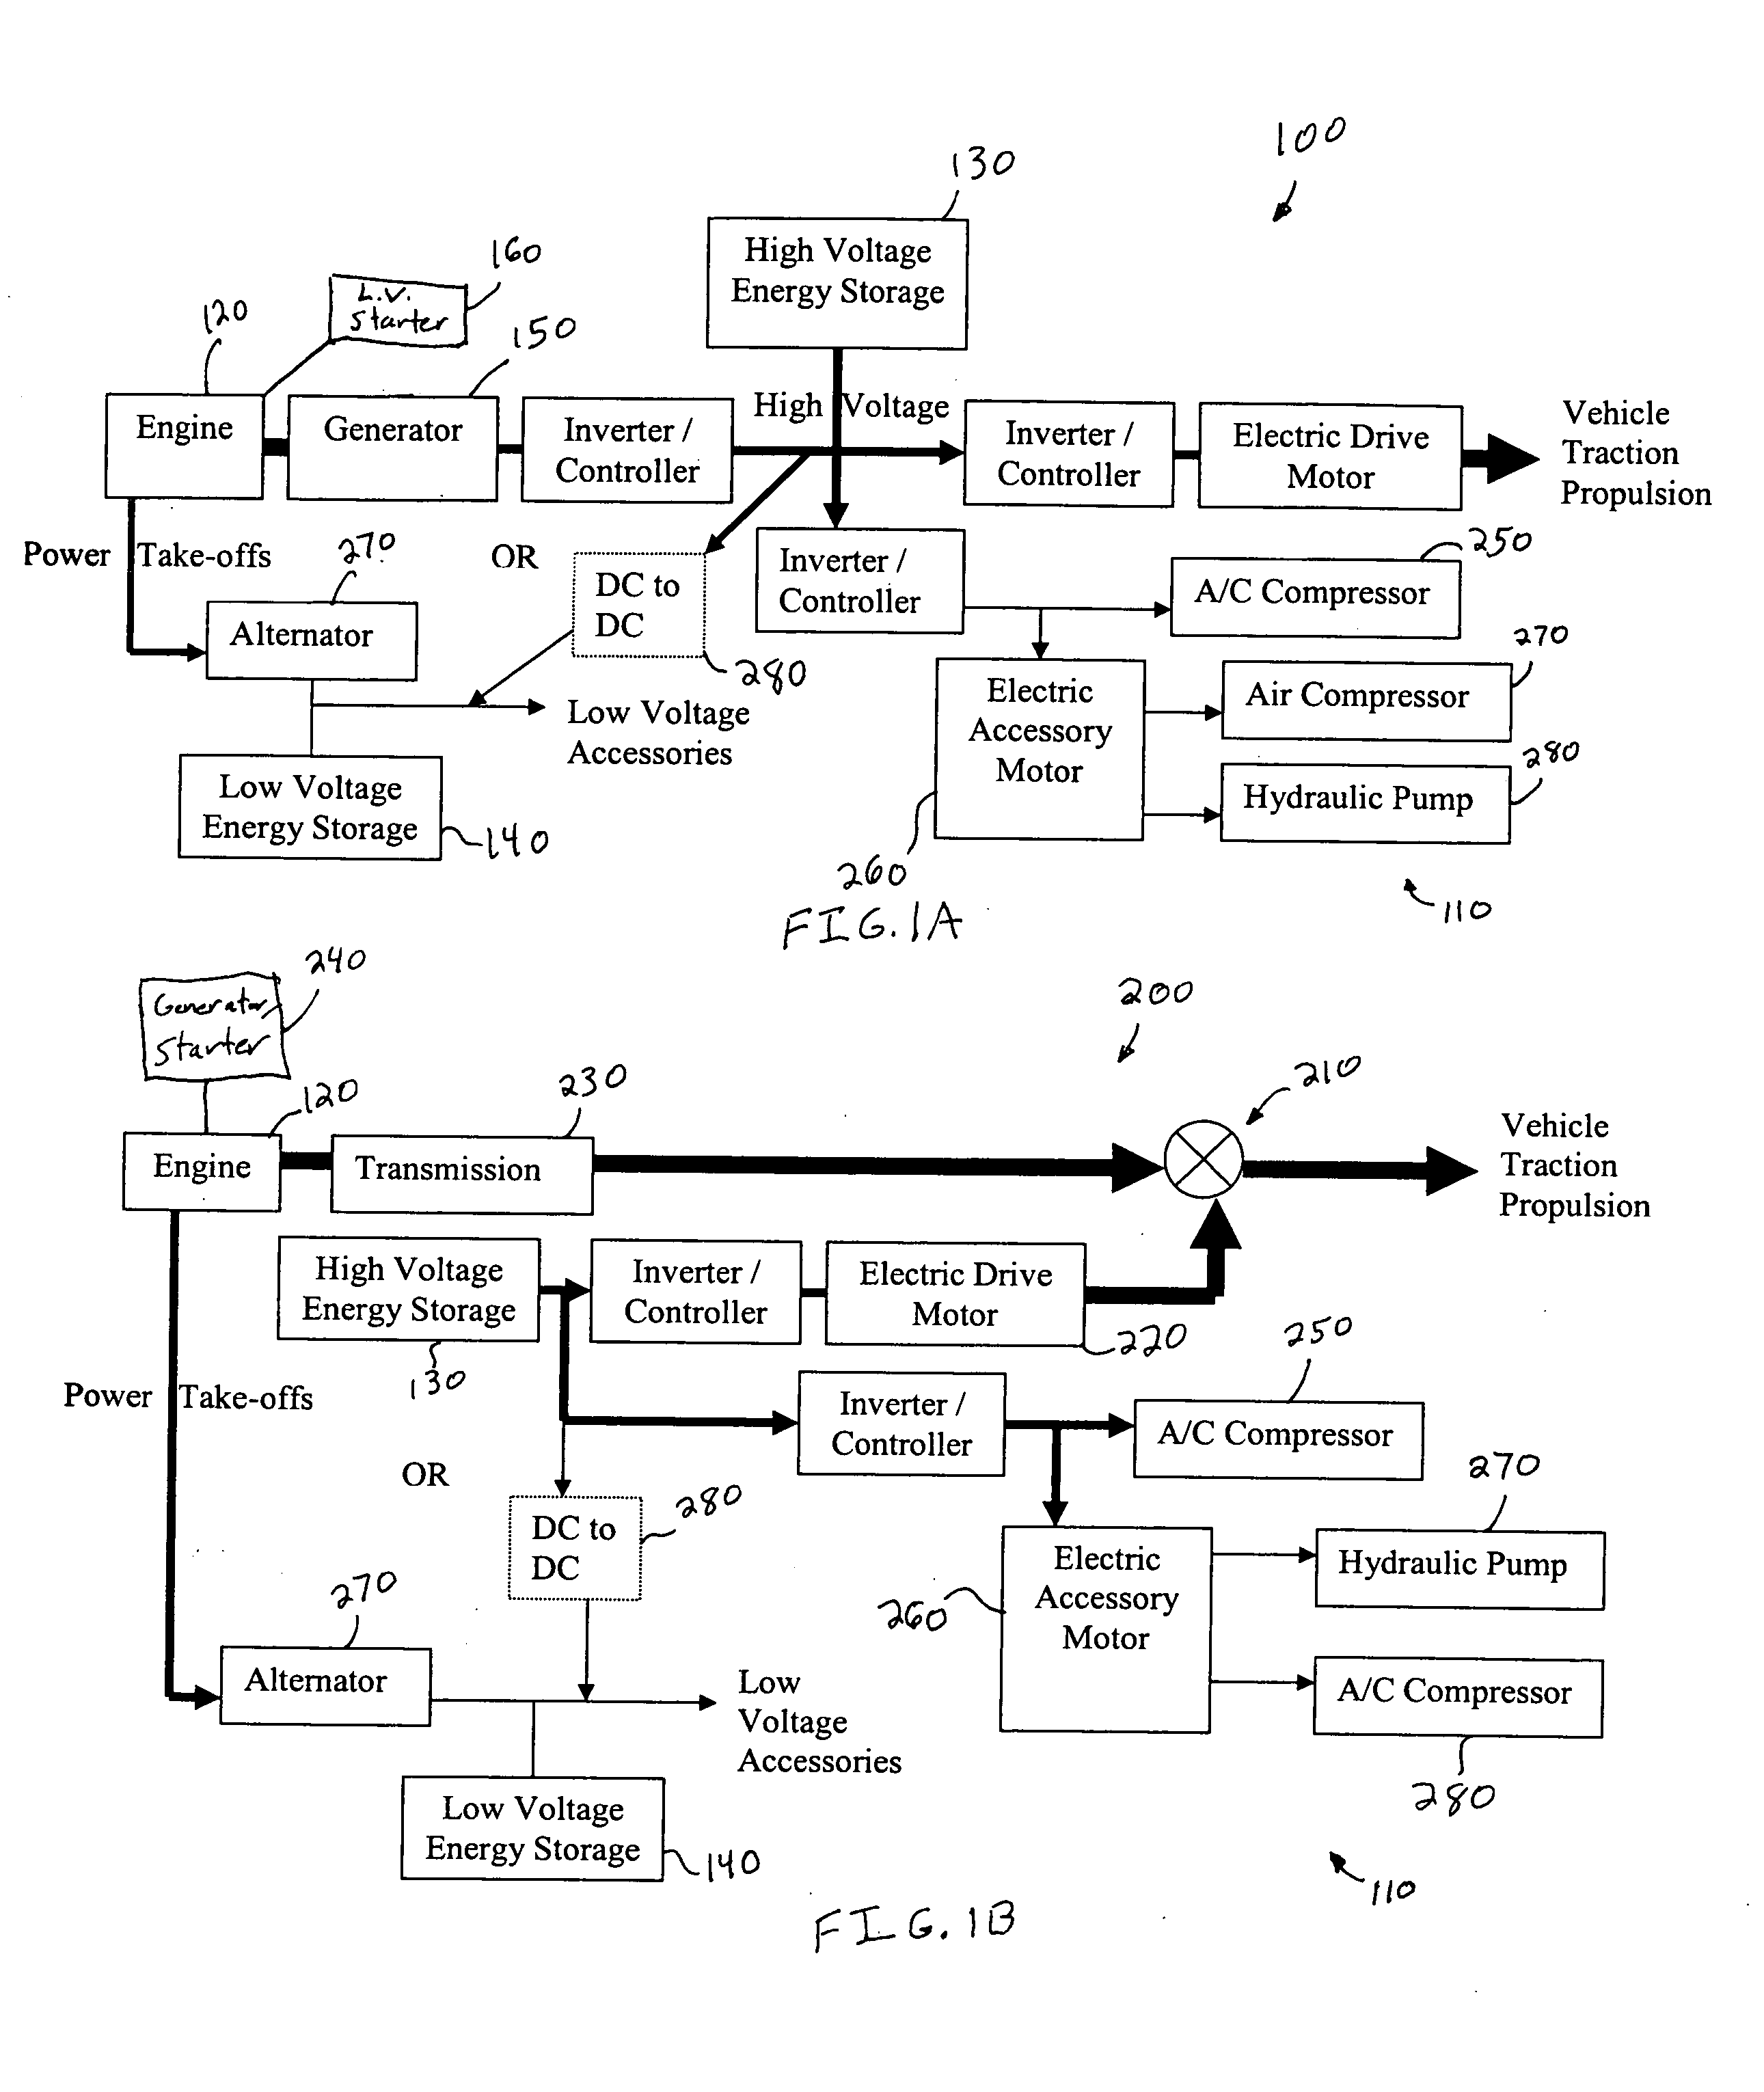 Method of controlling engine stop-start operation for heavy-duty hybrid-electric and hybrid-hydraulic vehicles